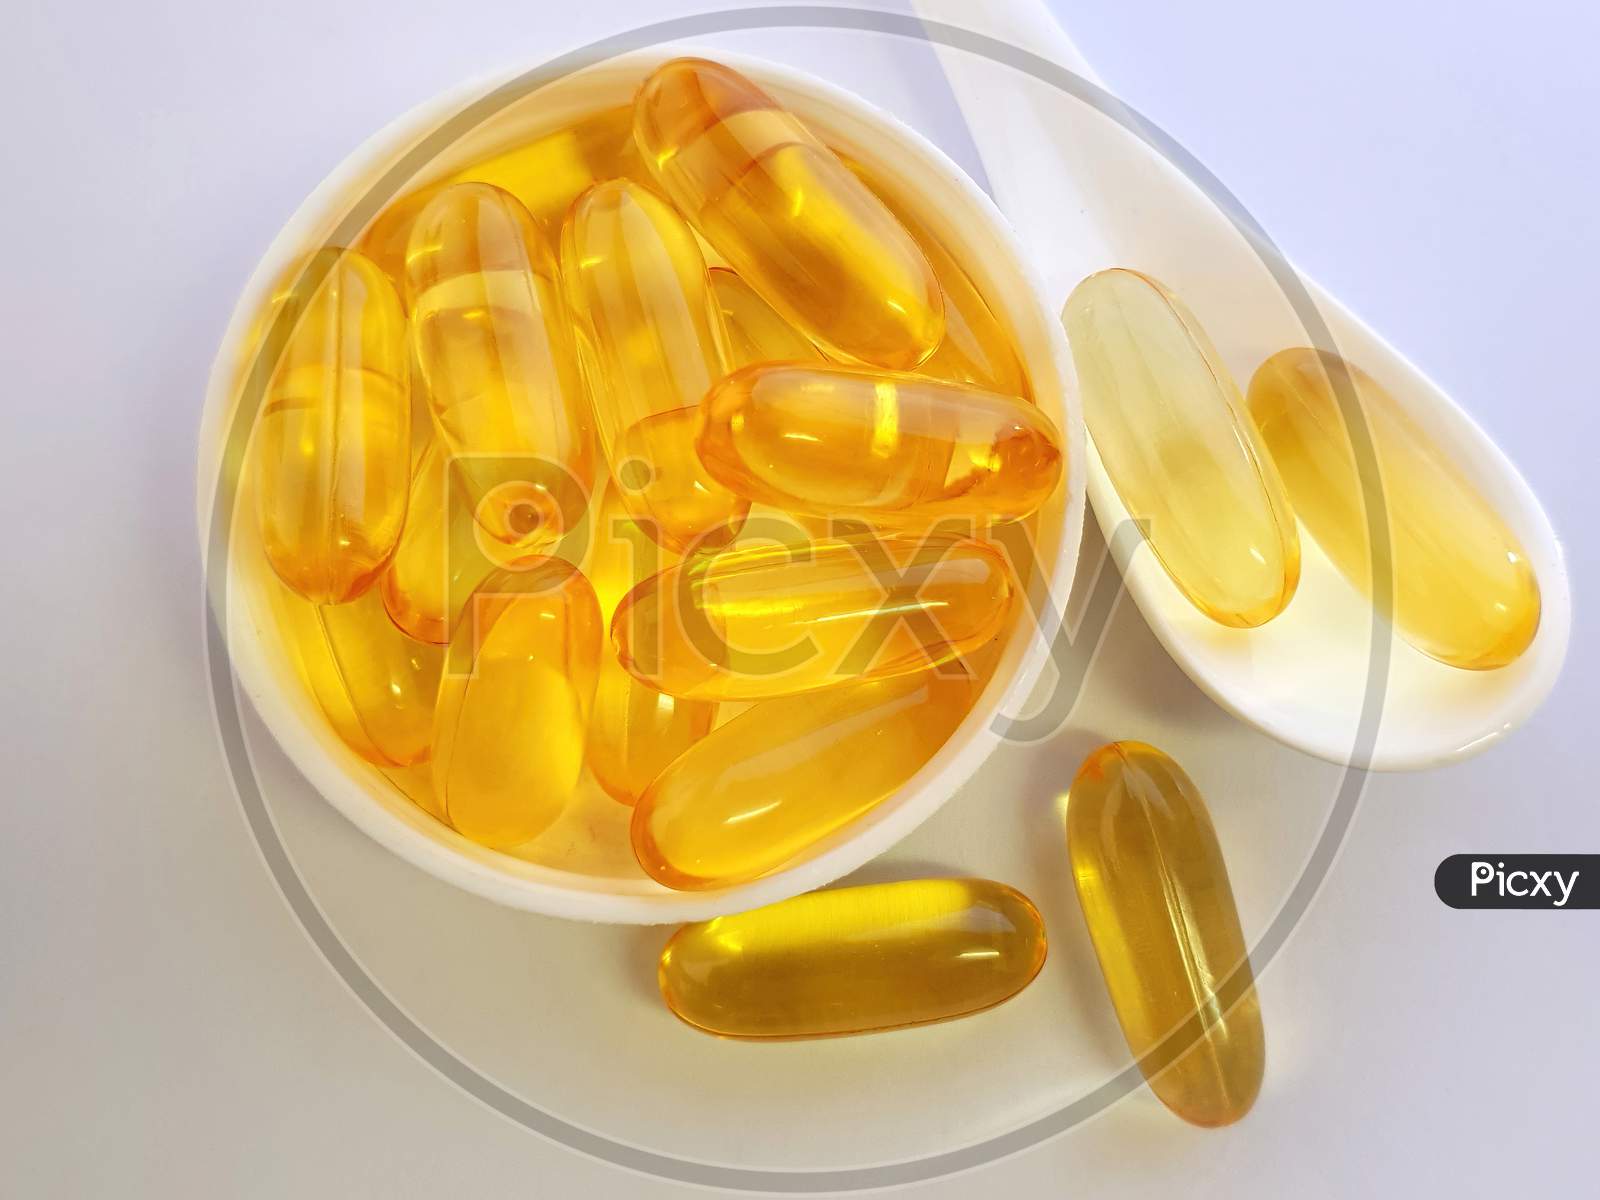 Fish Oil Capsules With Omega 3 And Vitamin D For Daily Supplement, Healthy Diet